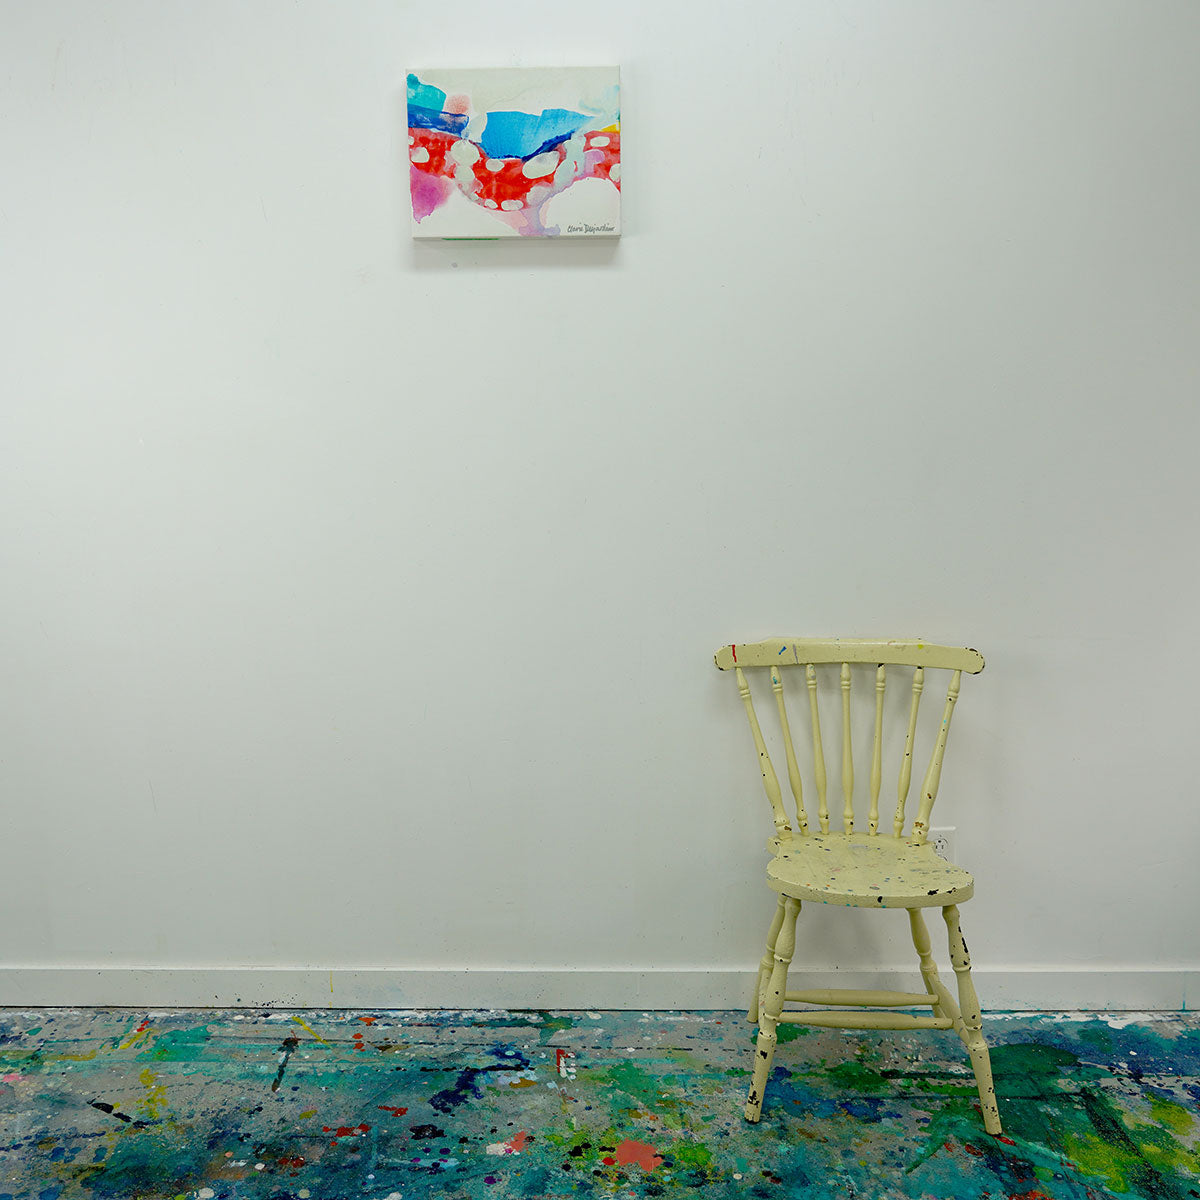 Original abstract painting, I Tiptoes Across, by Canadian abstract artist, Claire Desjardins. Hung on white studio wall with chair for scale.